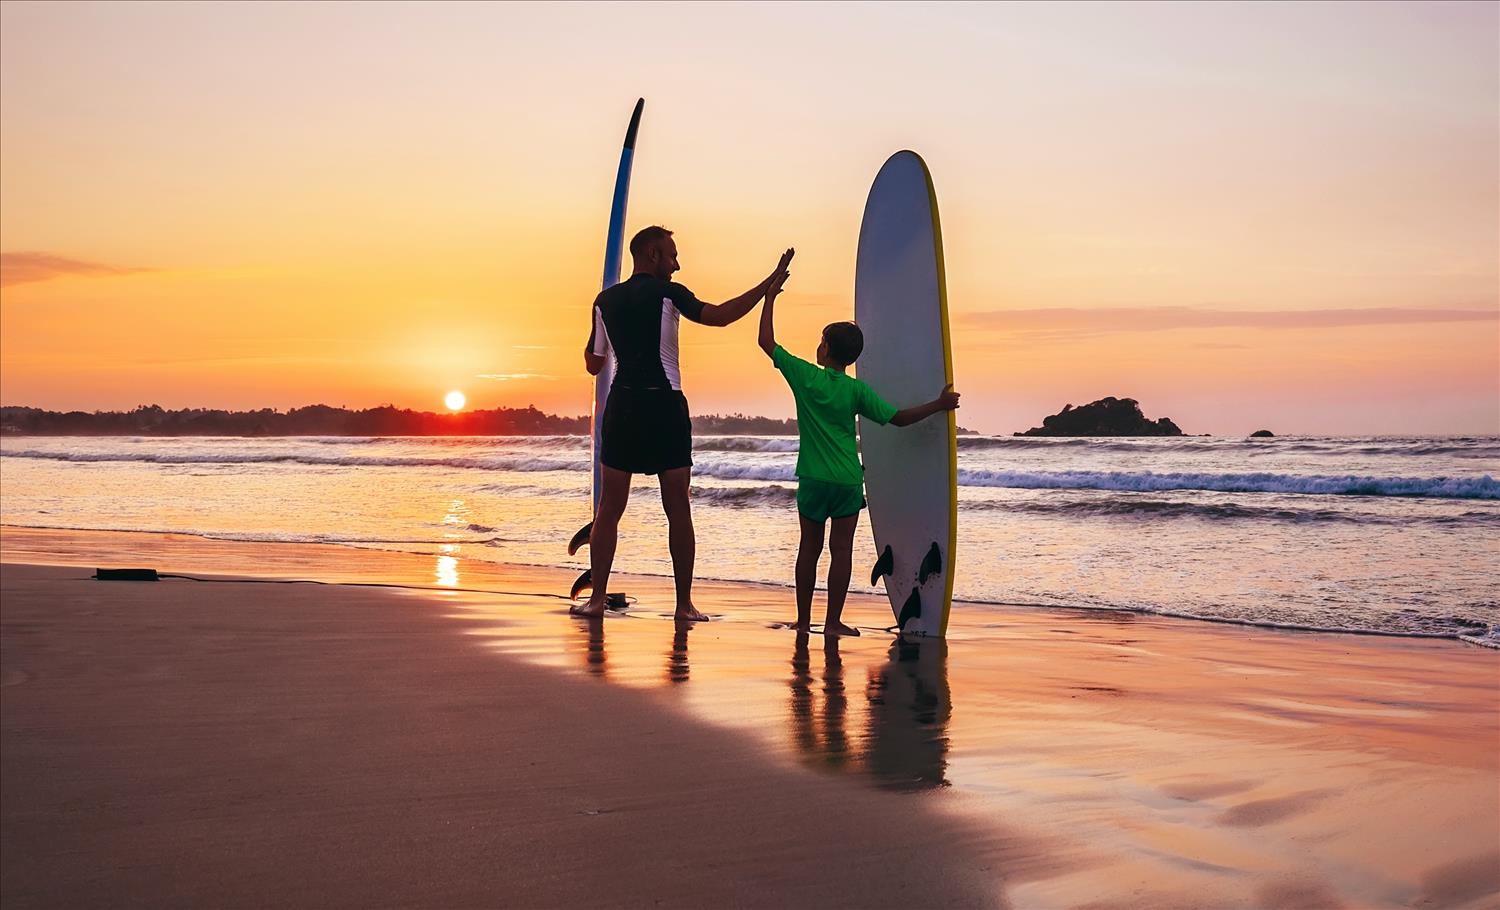 Father and son high-five as they stand in the sand with their surf-boards at their sides, watching the sun set